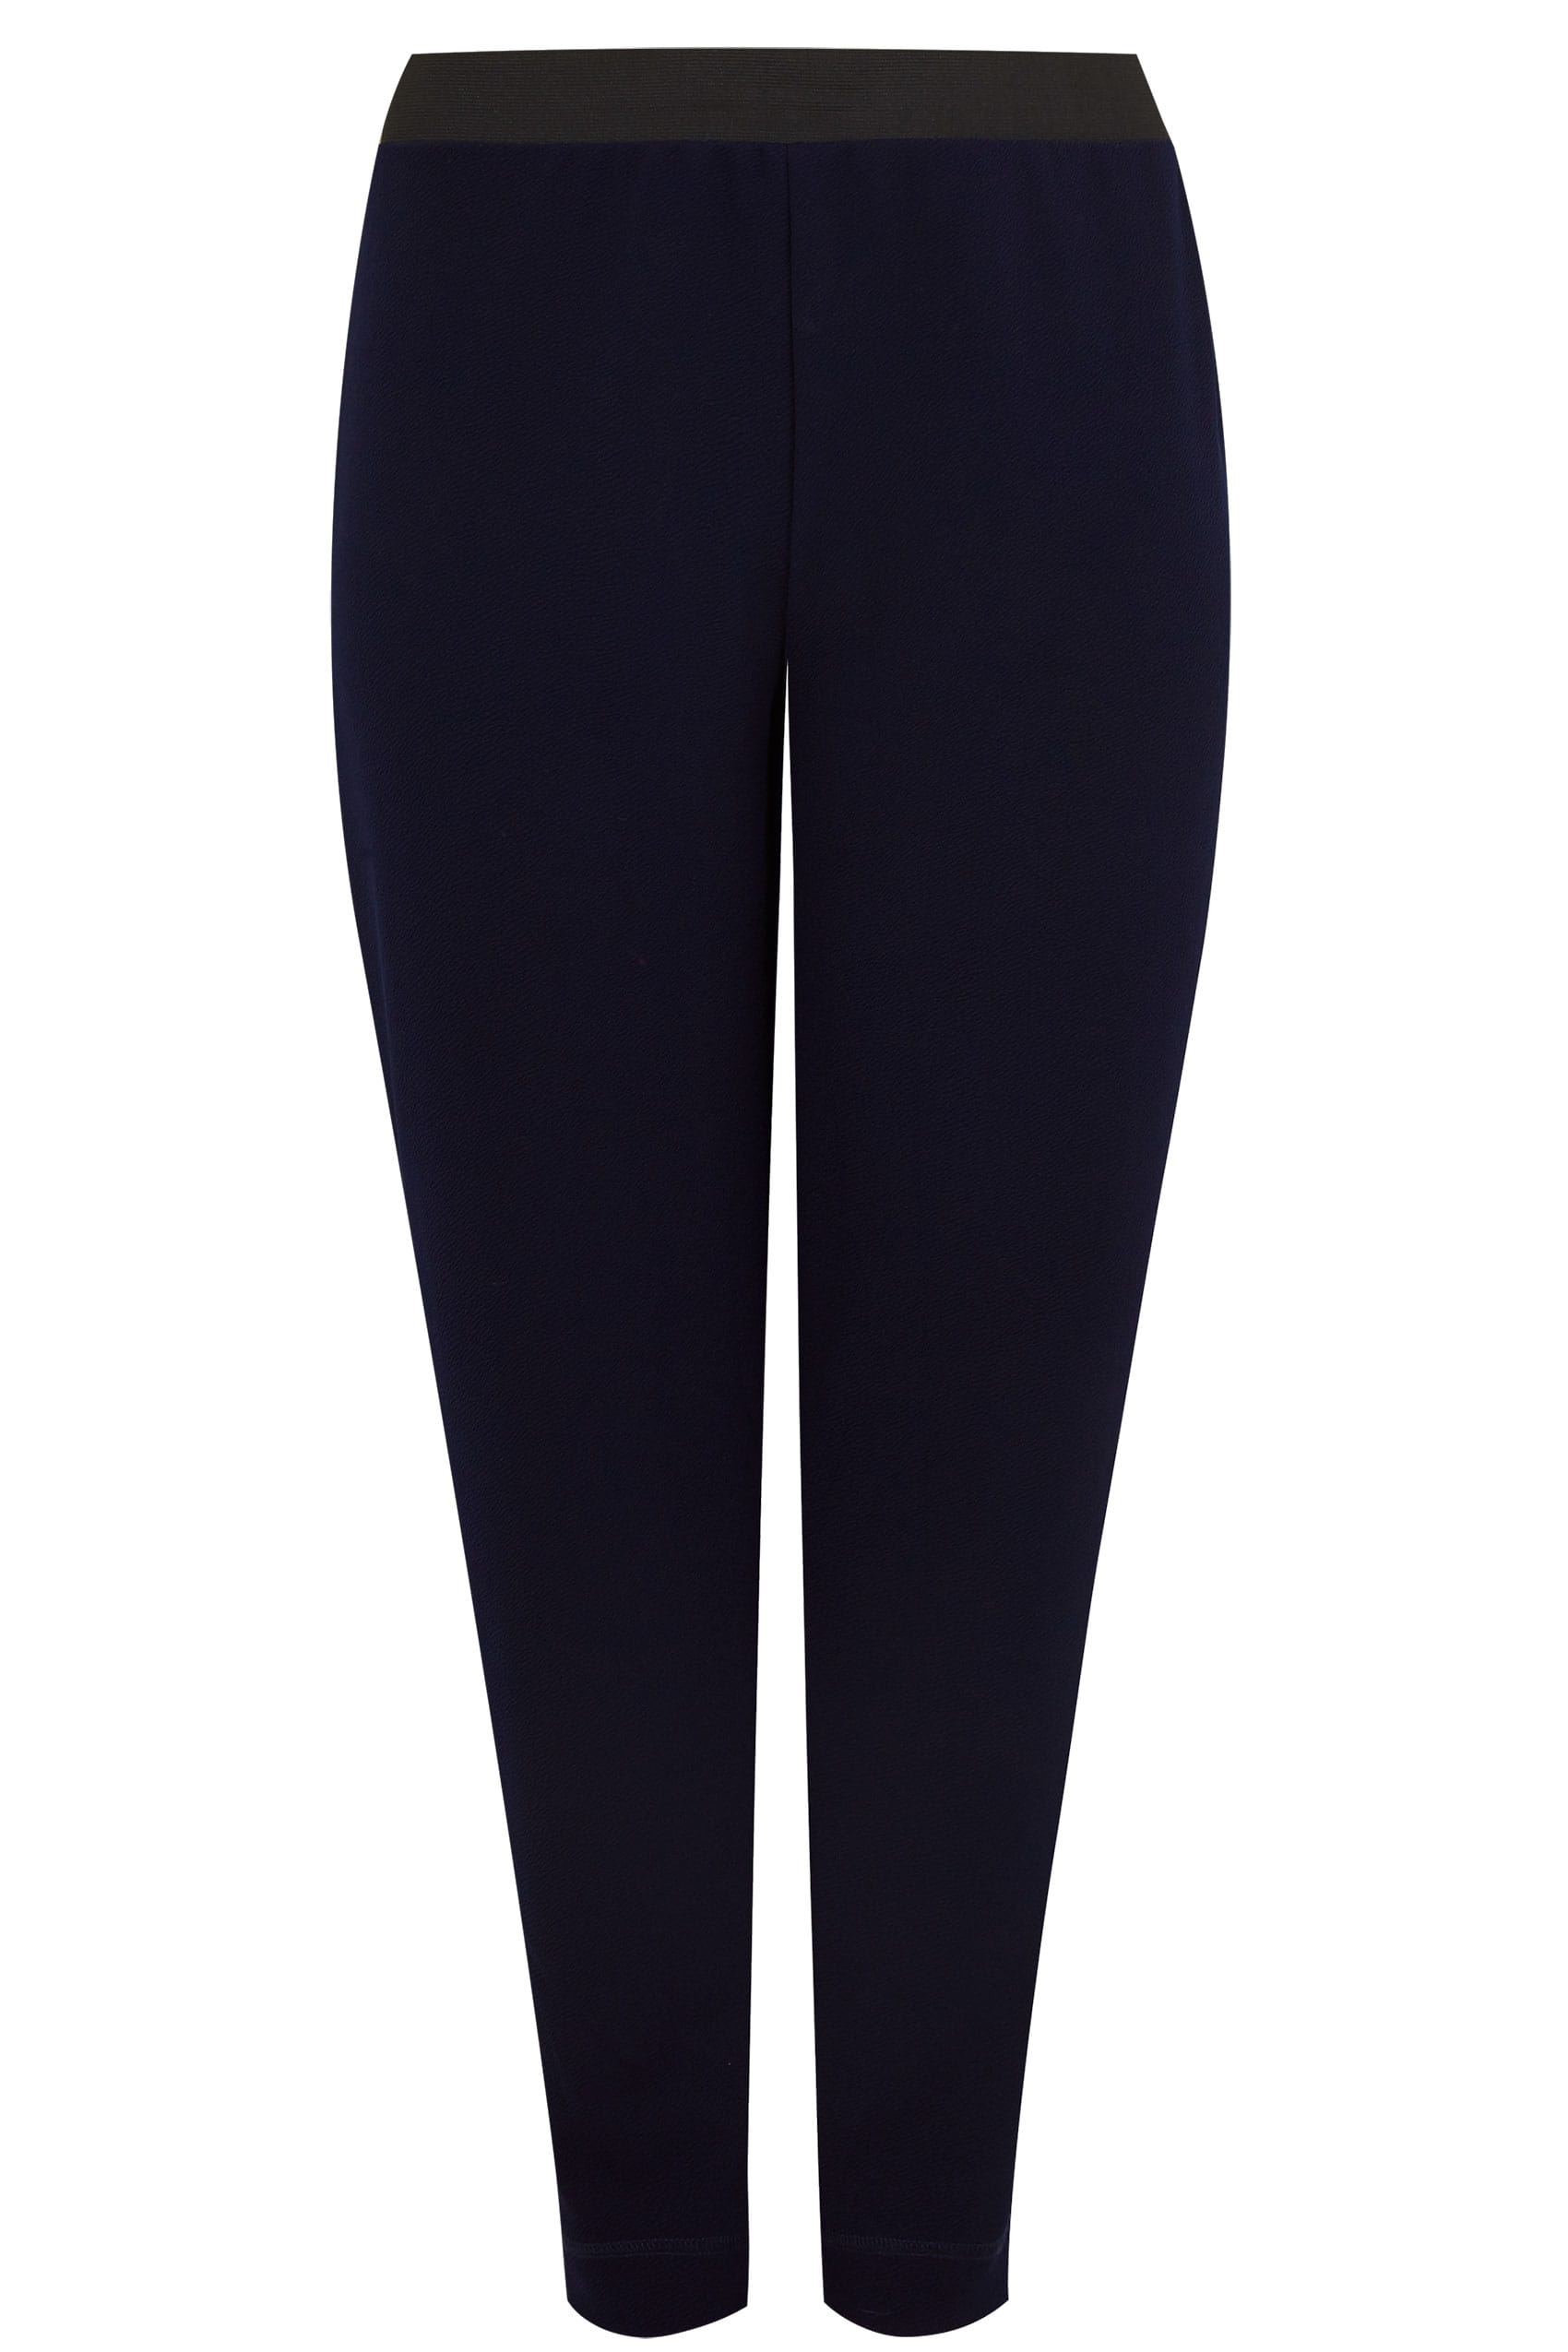 Navy Textured Jersey Harem Trousers, Plus size 16 to 32